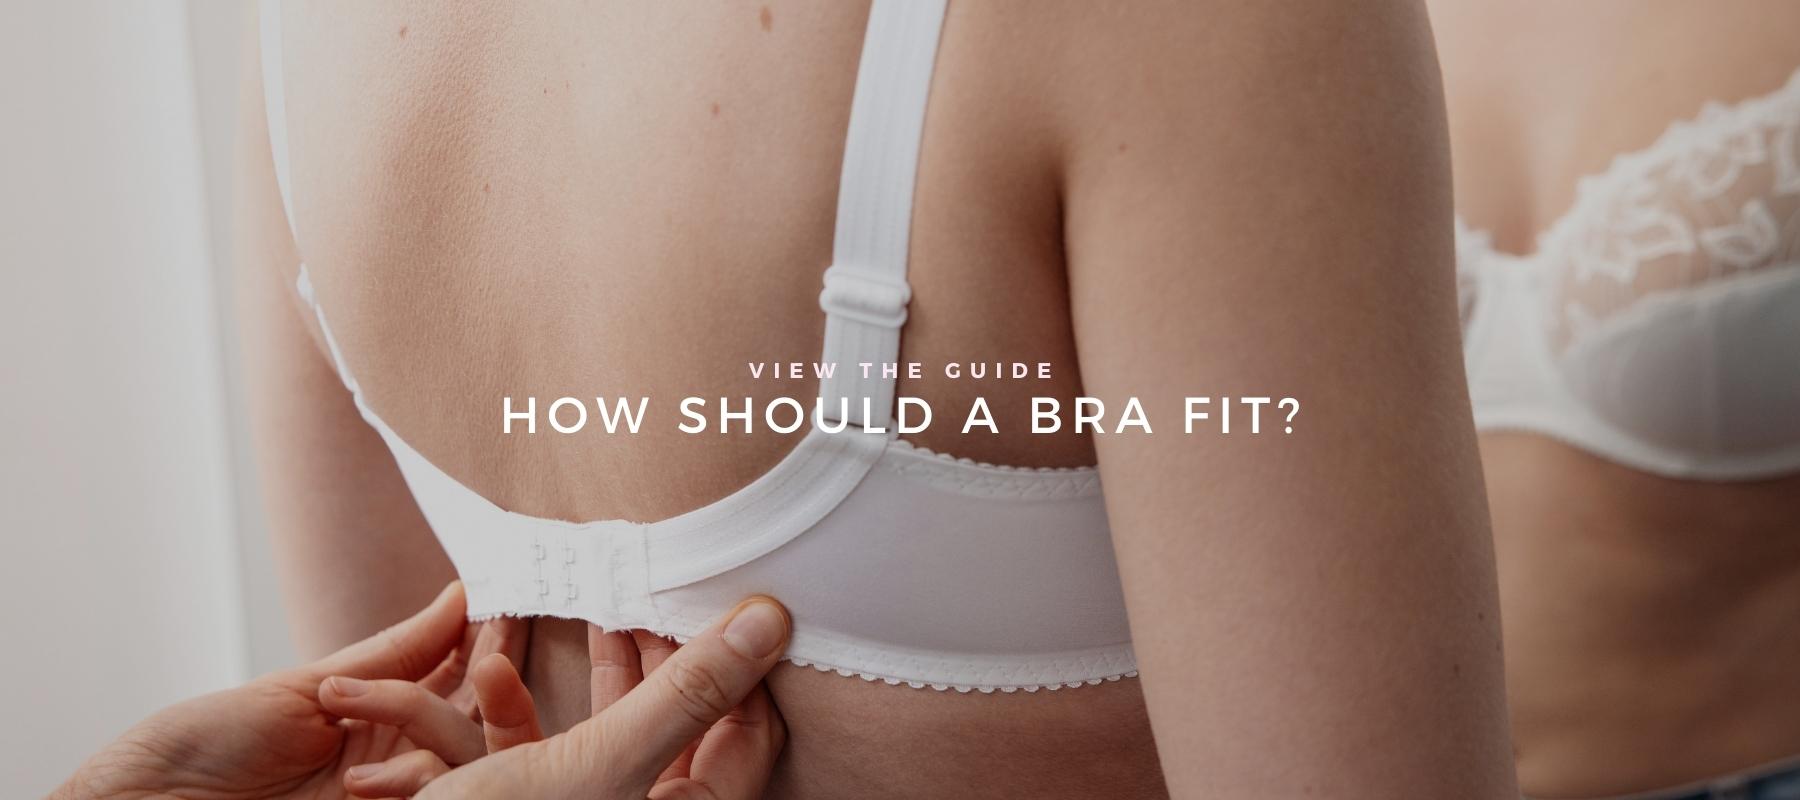 Are your bras not fitting postpartum? 😩 We can tell you why! As